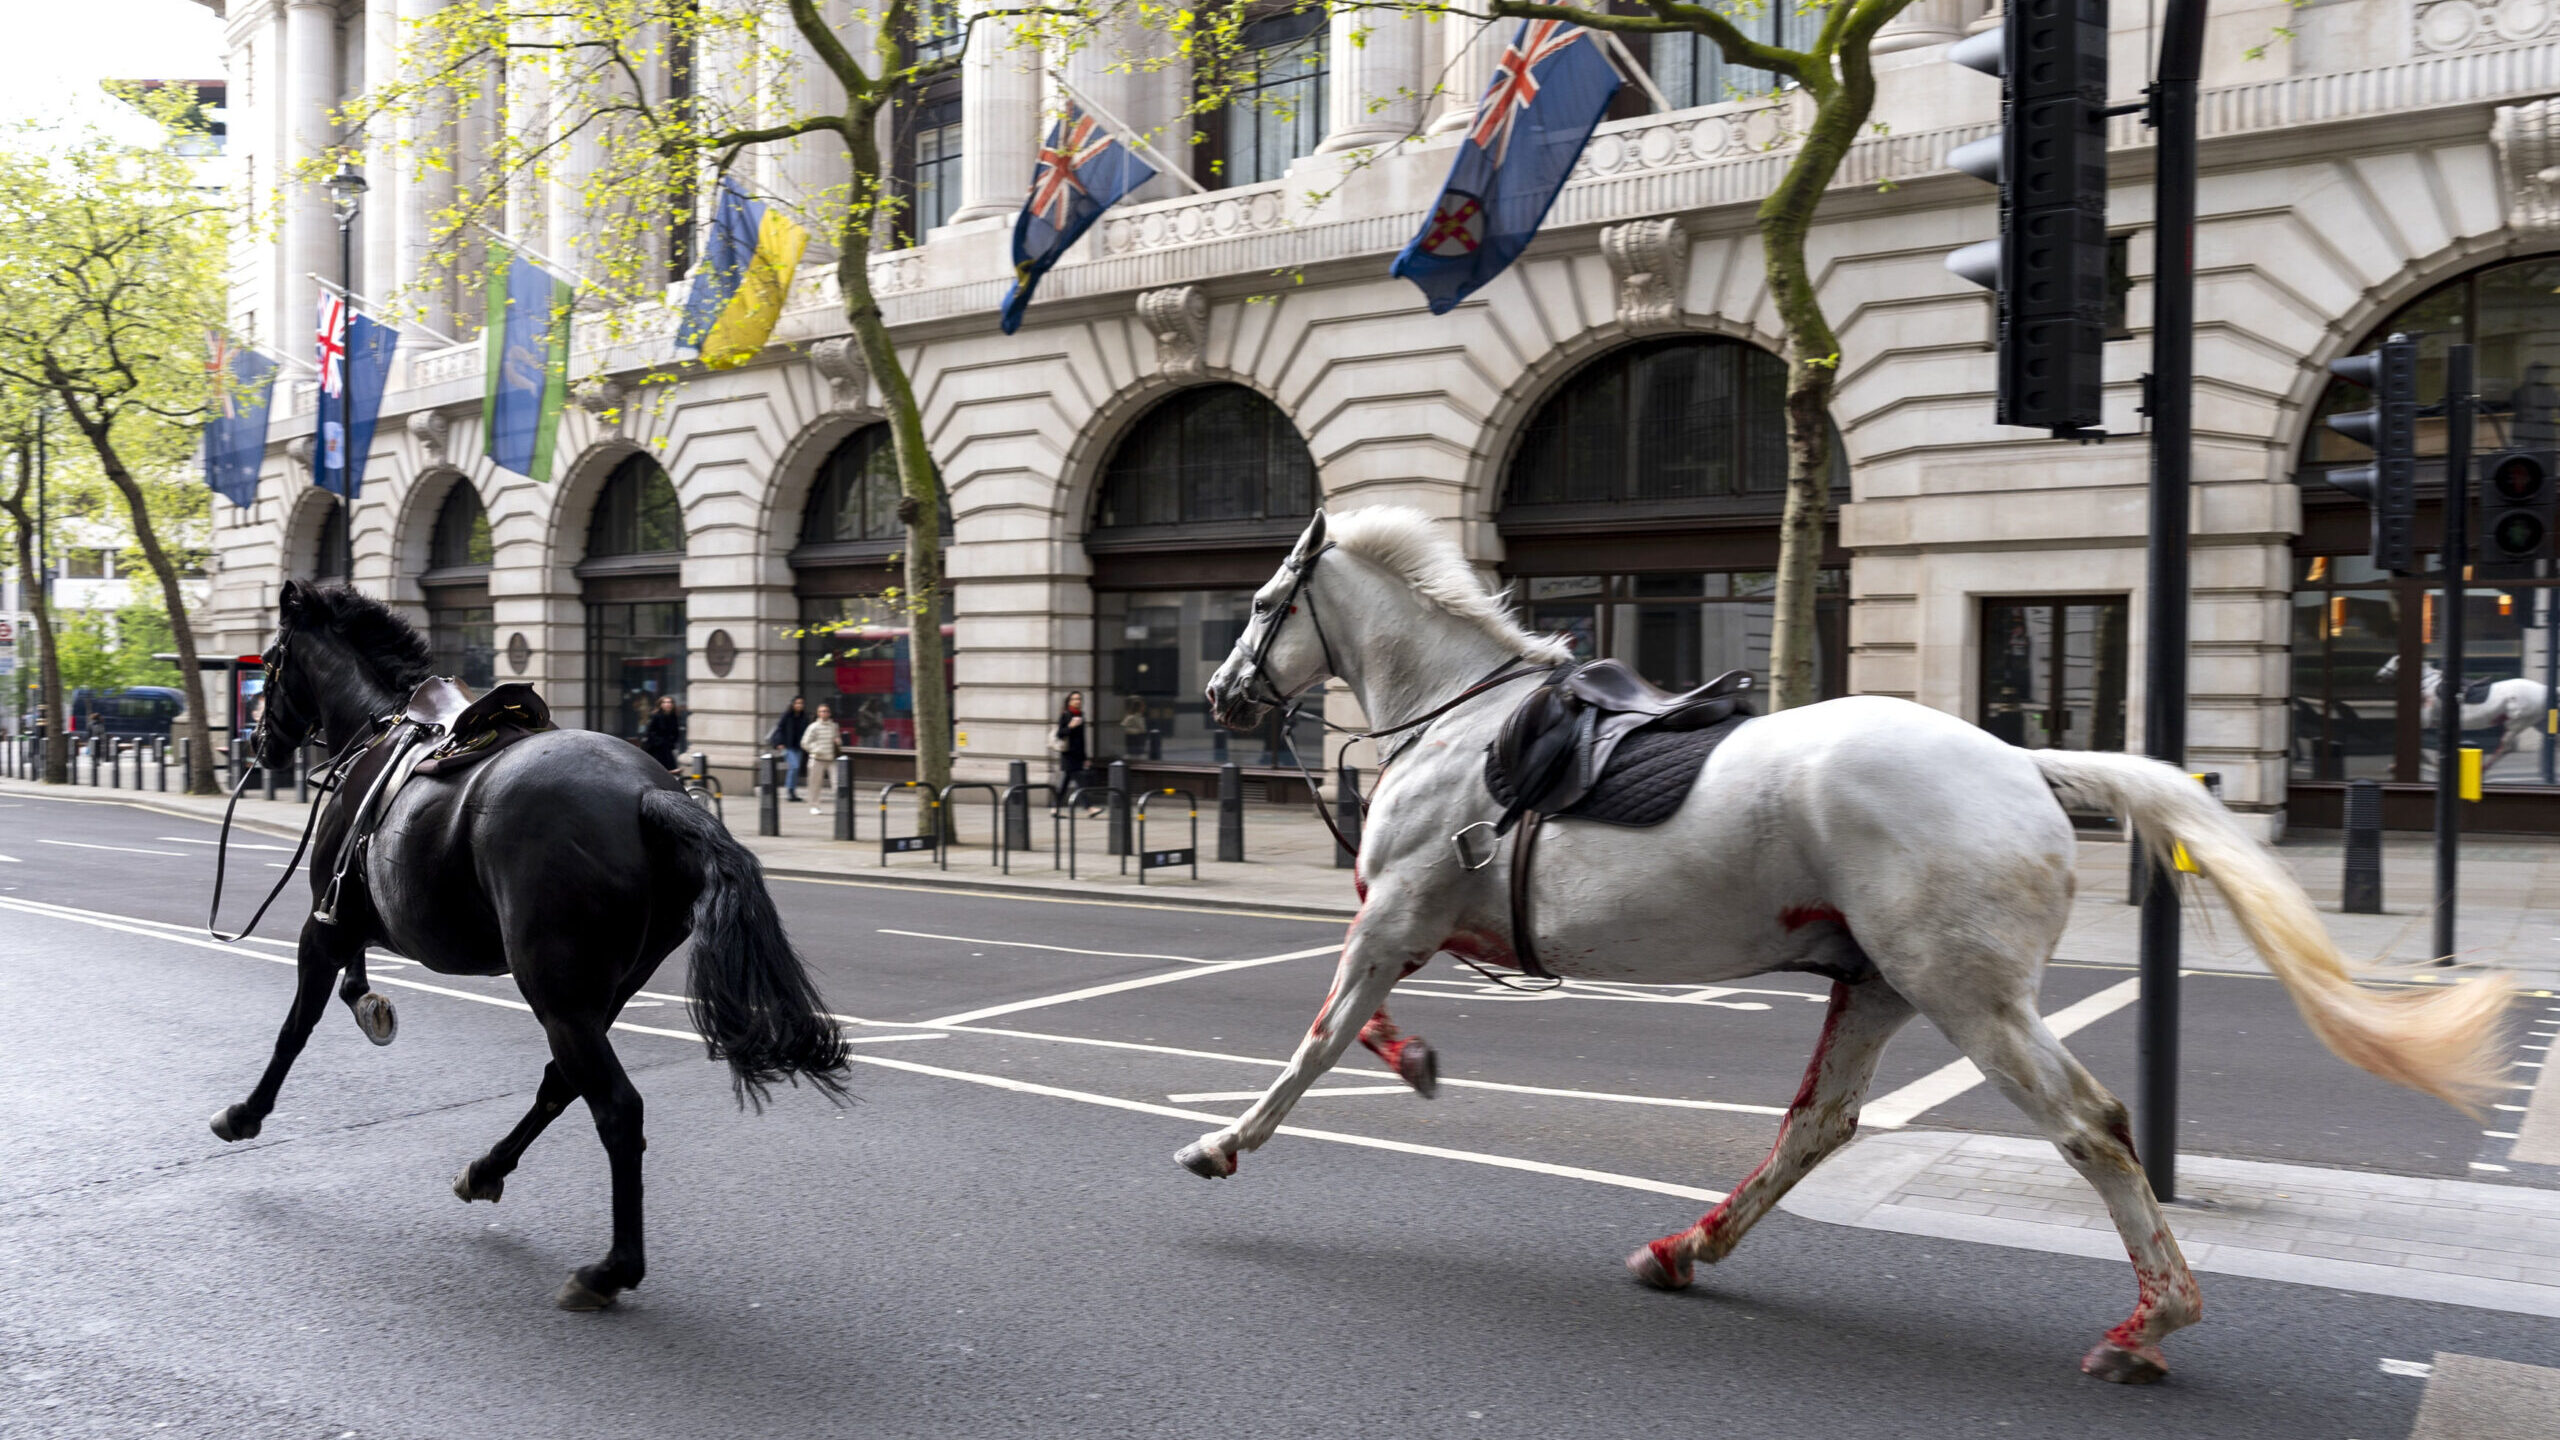 Two horses on the loose bolt through the streets of London near Aldwych, on Wednesday April 24, 202...